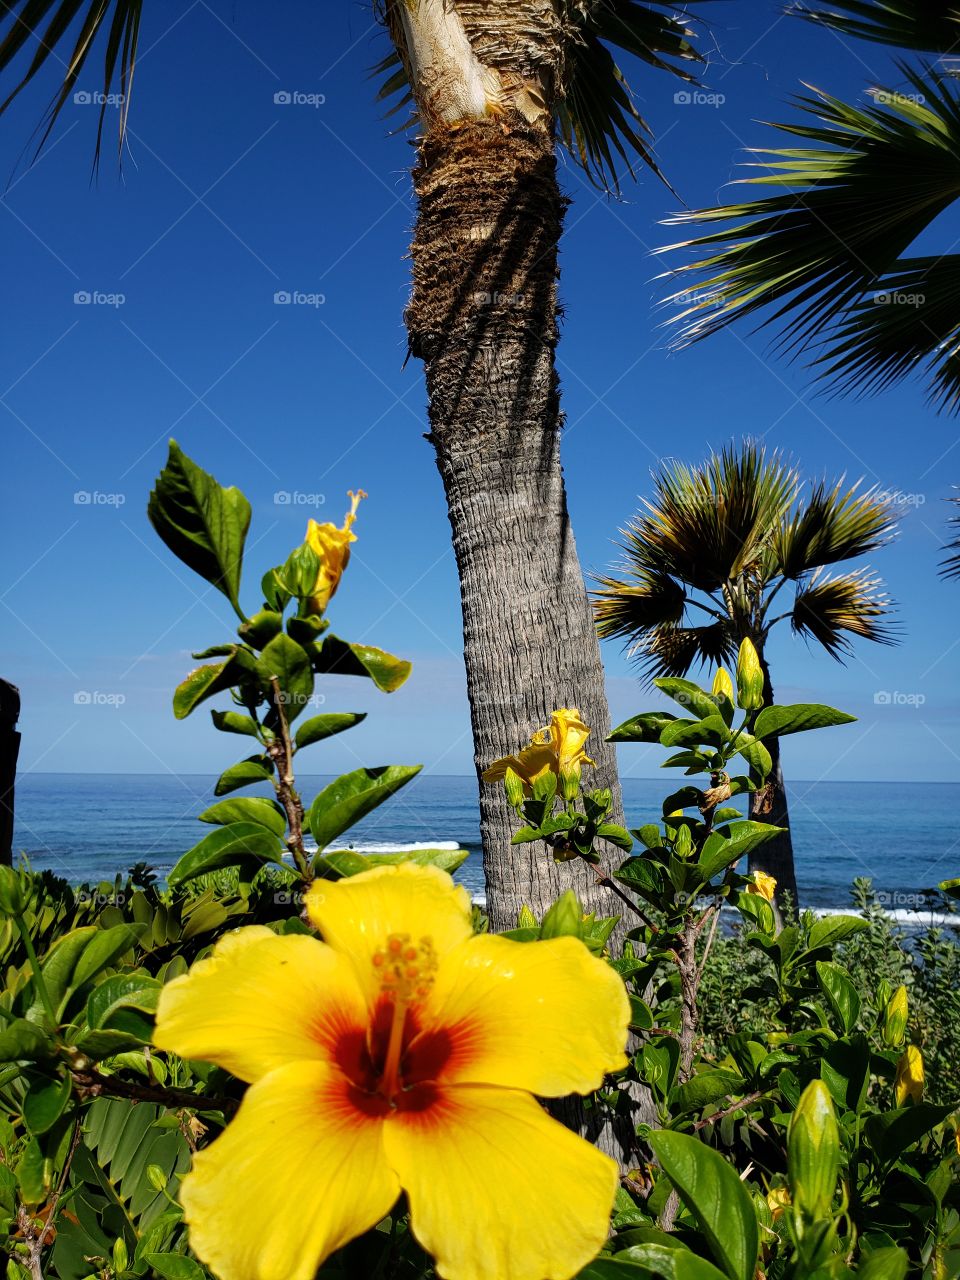 hibiscus and palm trees